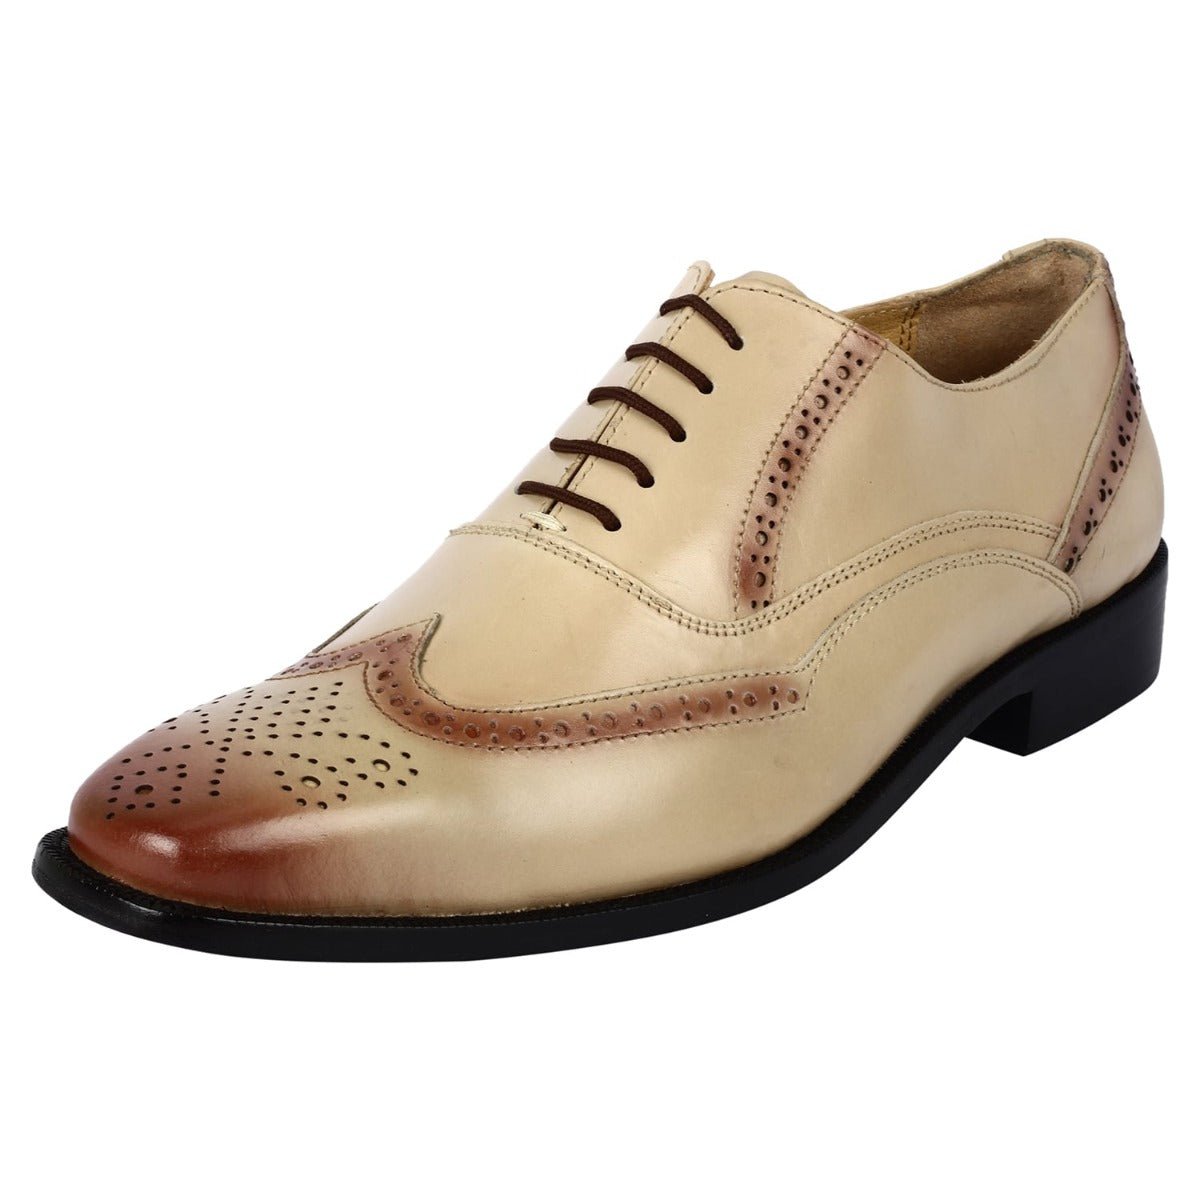 Bubble Leather Oxford Style Dress Shoes